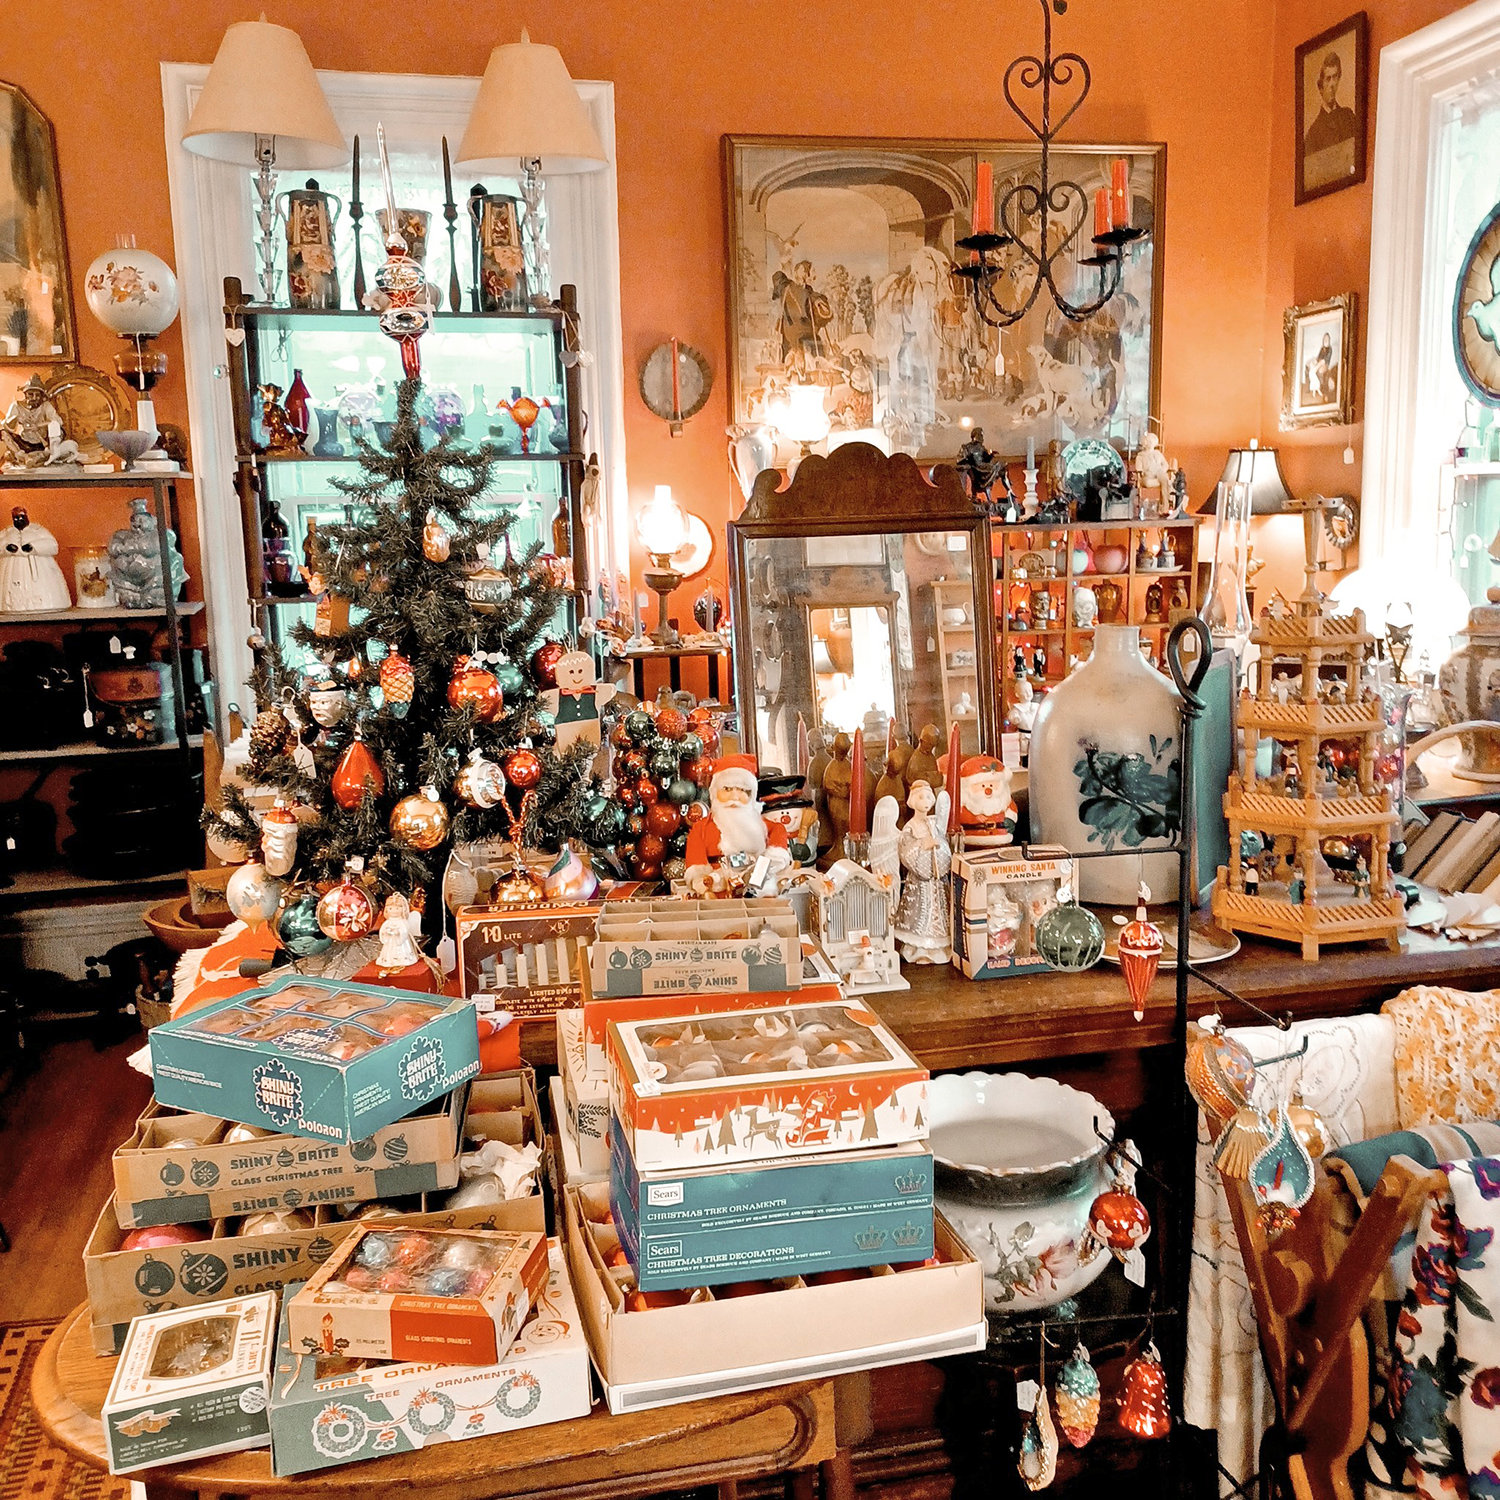 The annual Holiday Open House kicks off the gift shopping season from 10 a.m. to 5 p.m. Nov. 11-13 at a variety of antiques and collectibles dealers from Madison to Bouckville.